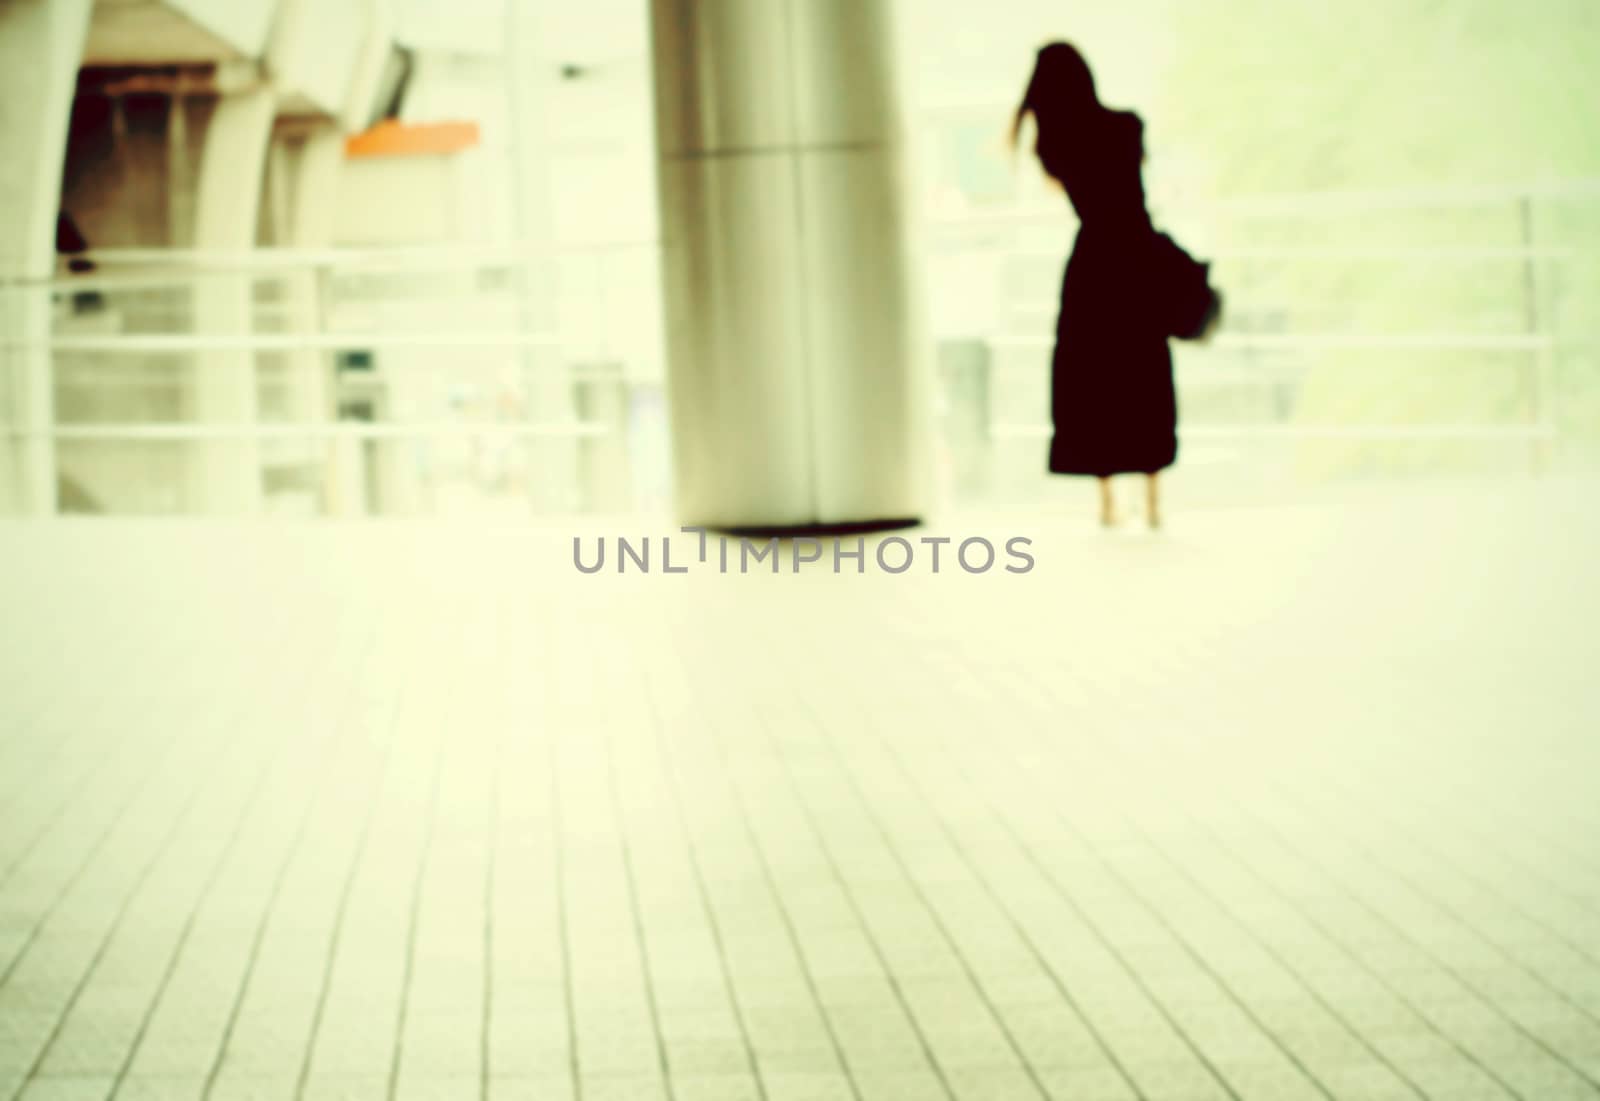 Blur abstract of city people background